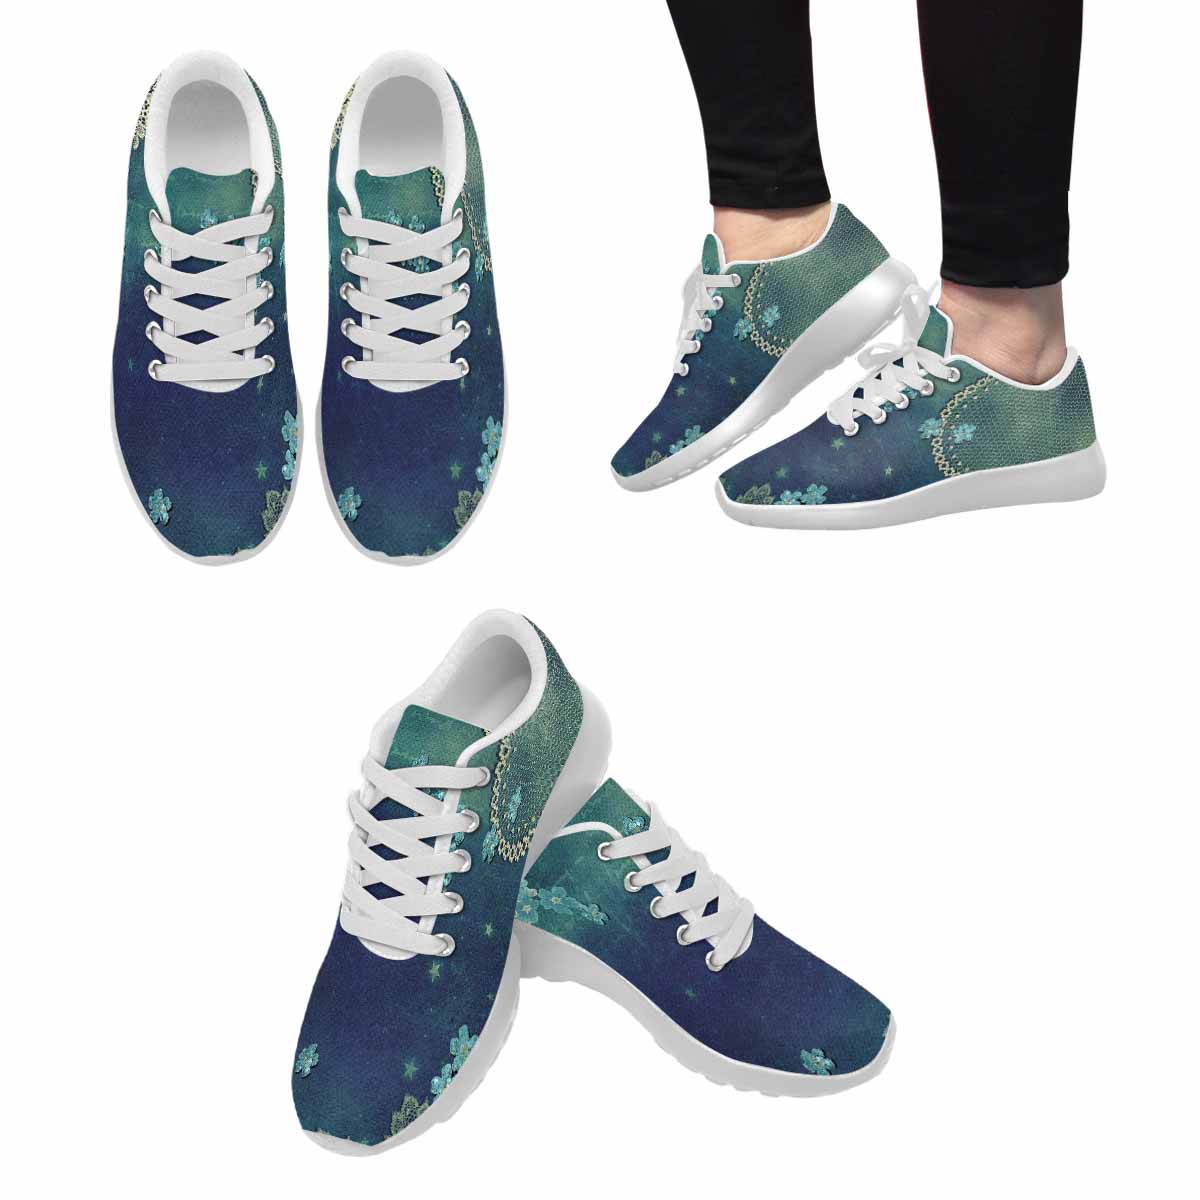 Victorian lace print, womens cute casual or running sneakers, design 04